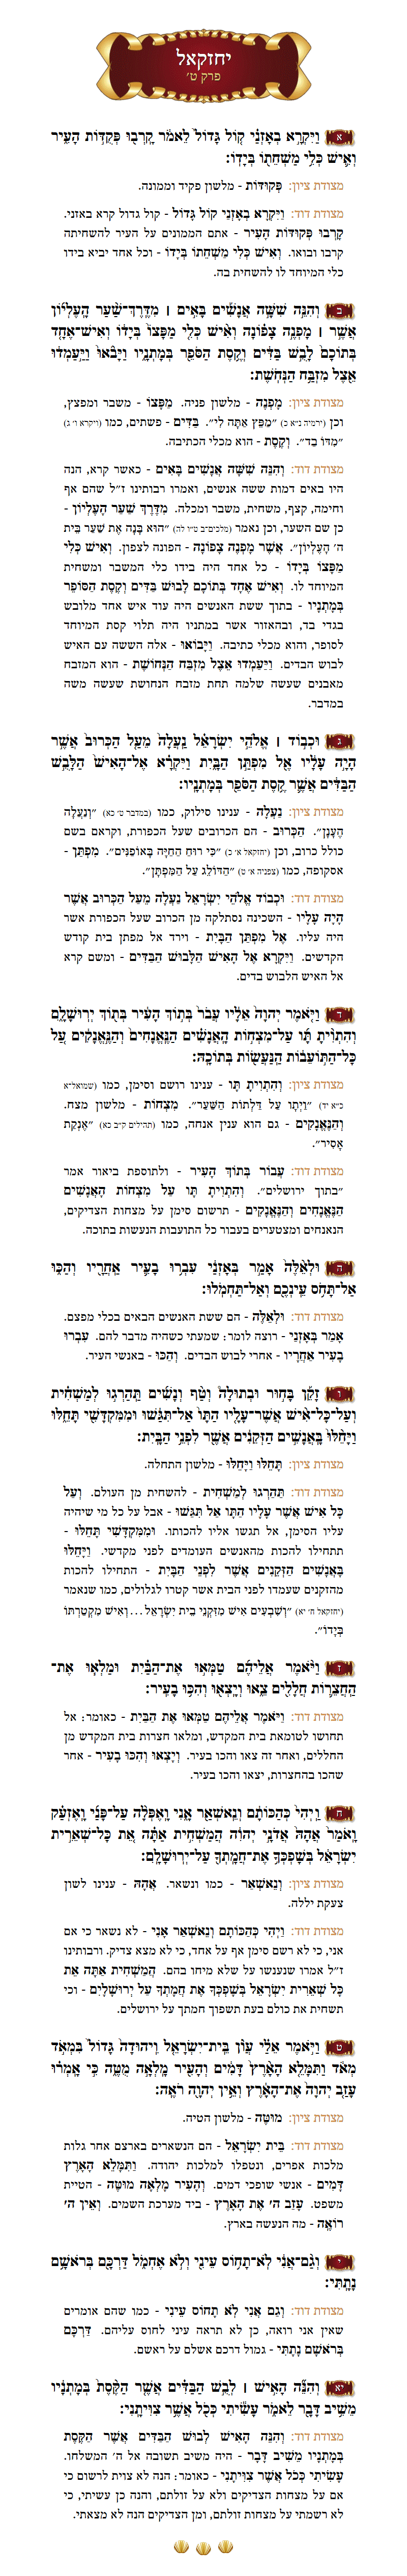 Sefer Yechezkel Chapter 9 with commentary